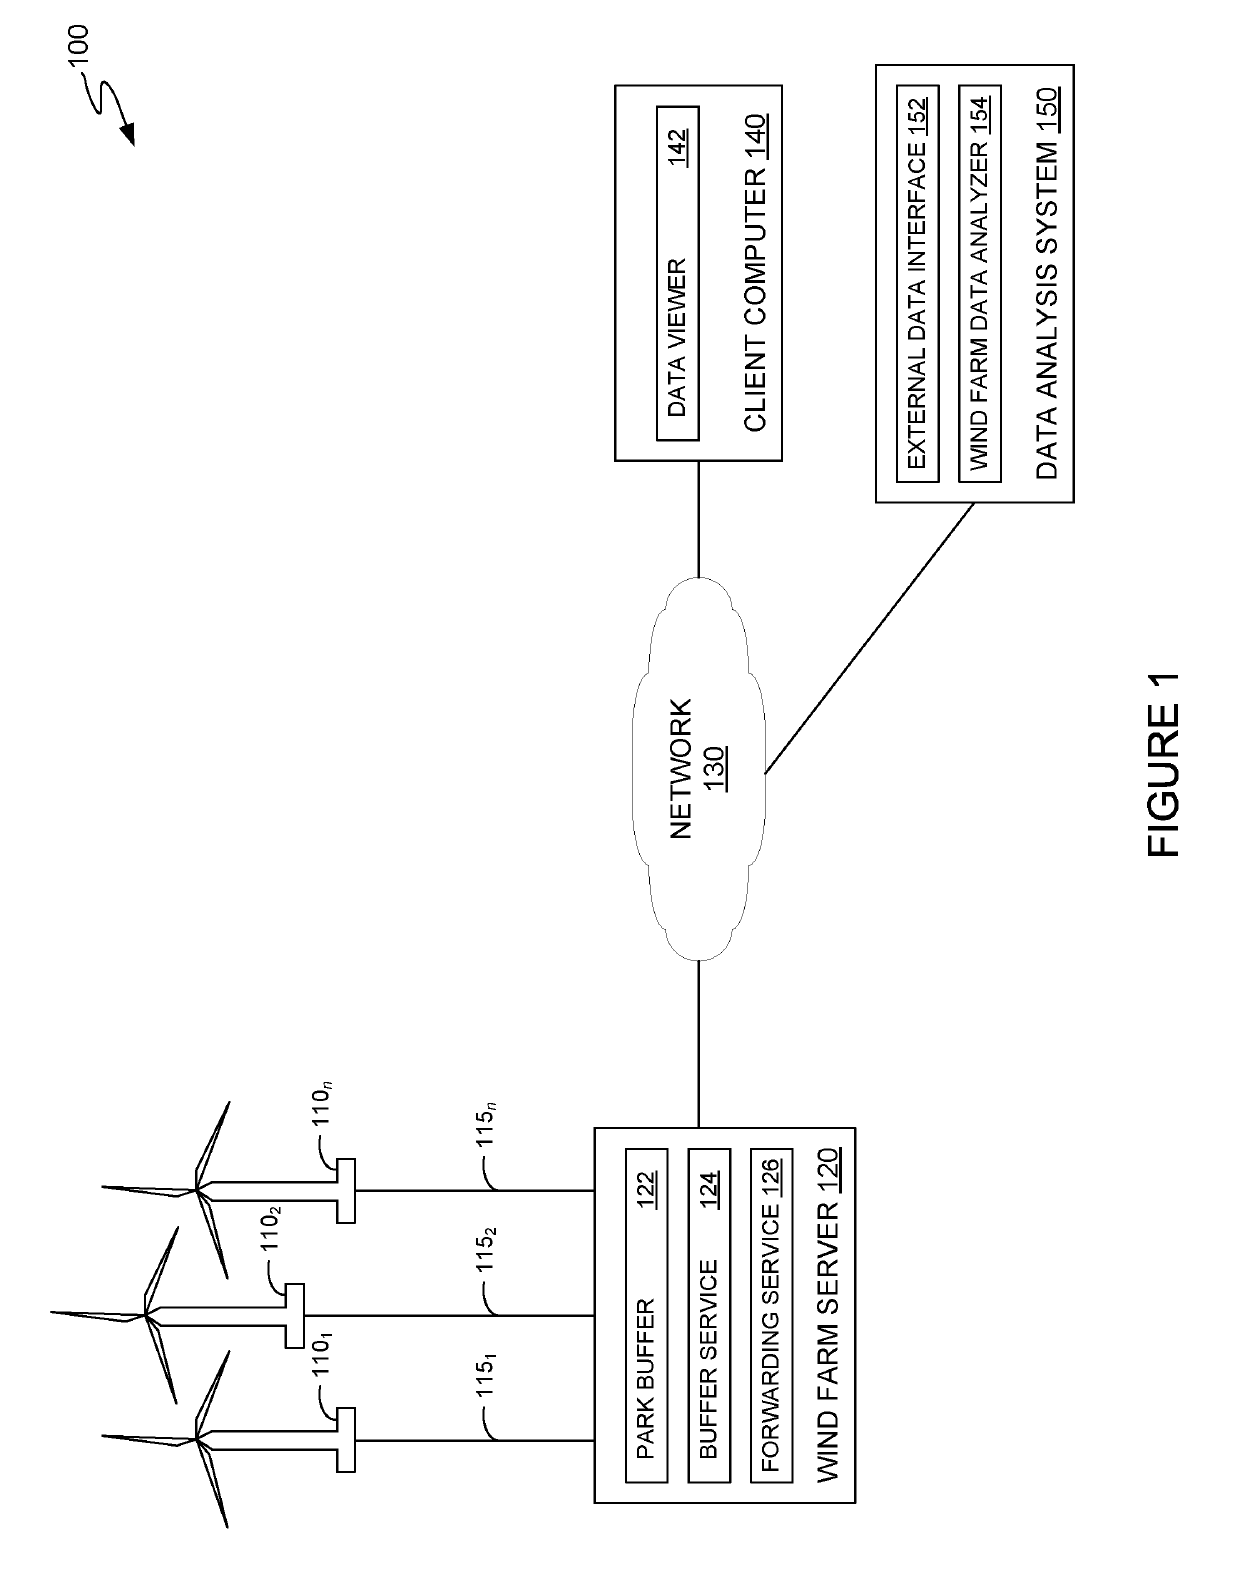 Data collection system for wind turbine data